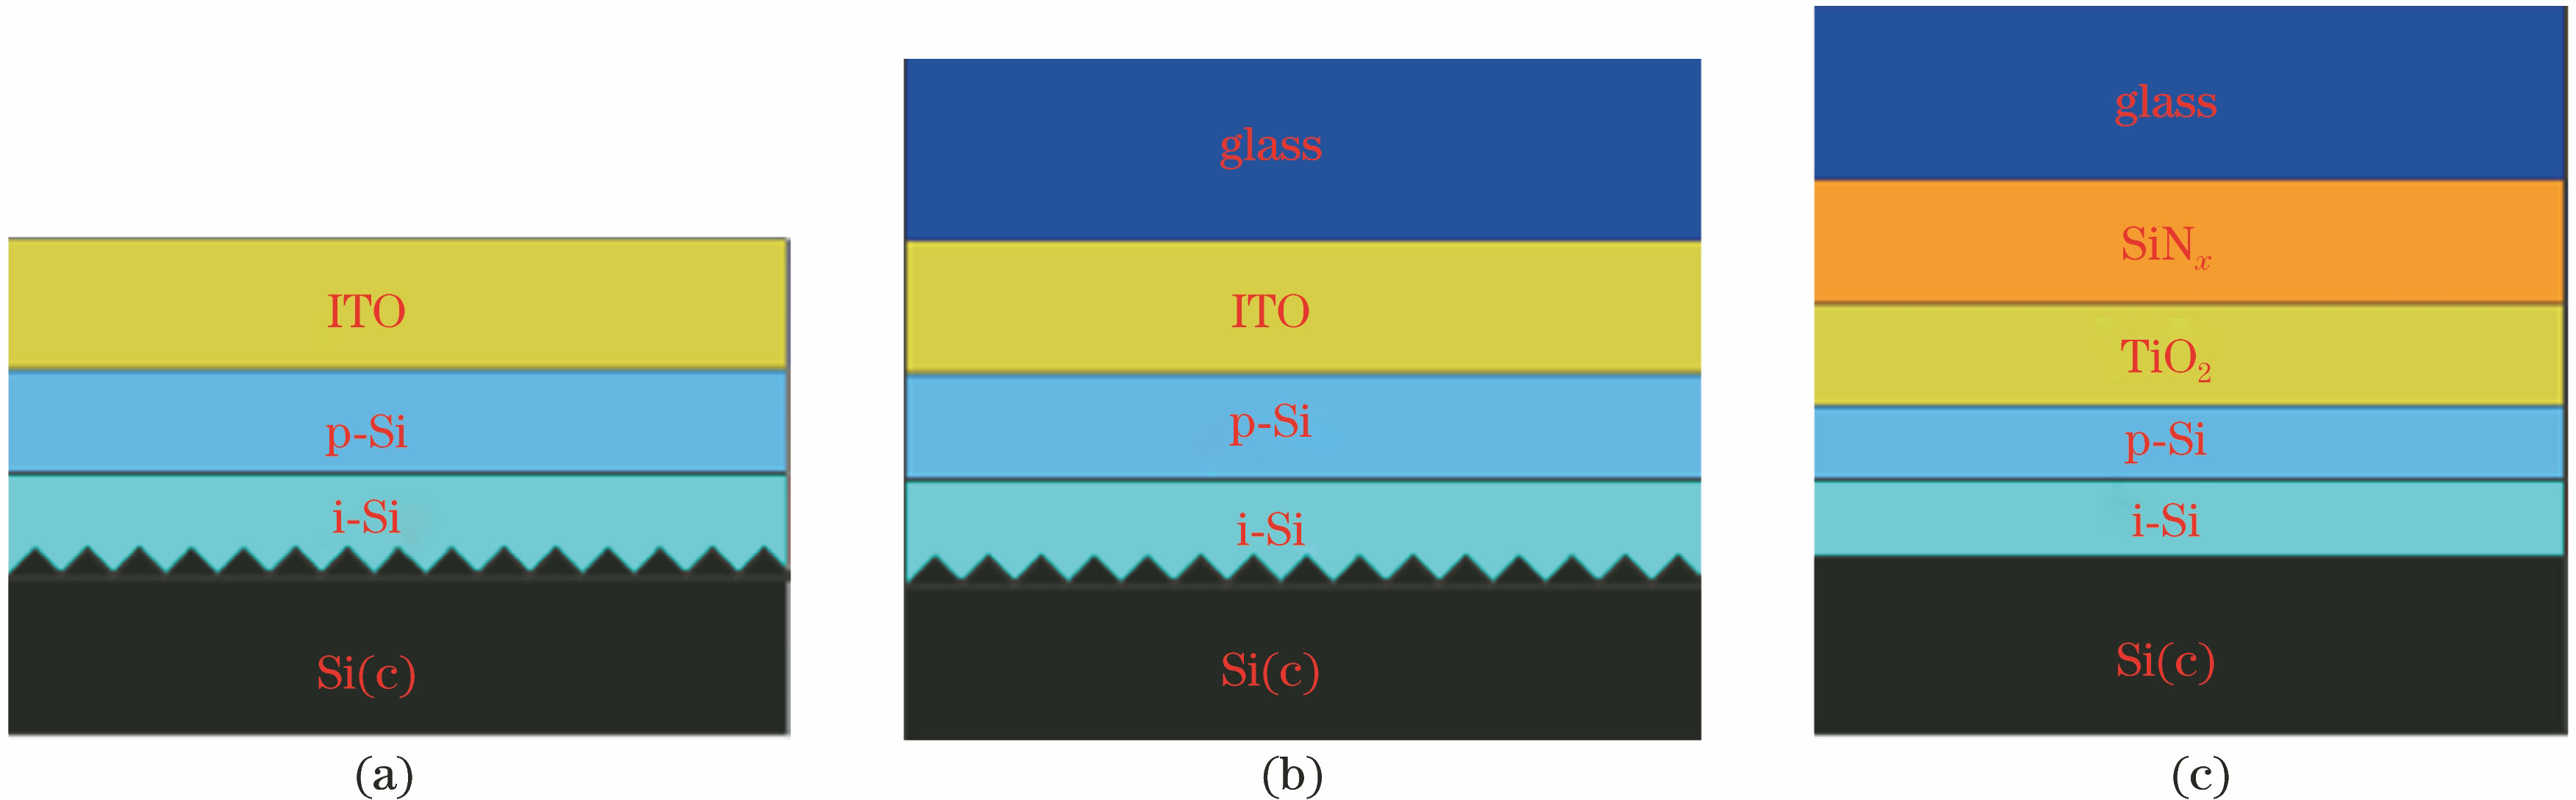 Structural diagram of double-layer antireflection films on the surface of solar cells. (a)(b) Textured silicon heterojunction solar cells before and after encapsulation; (c) planar silicon heterojunction solar cell after encapsulation